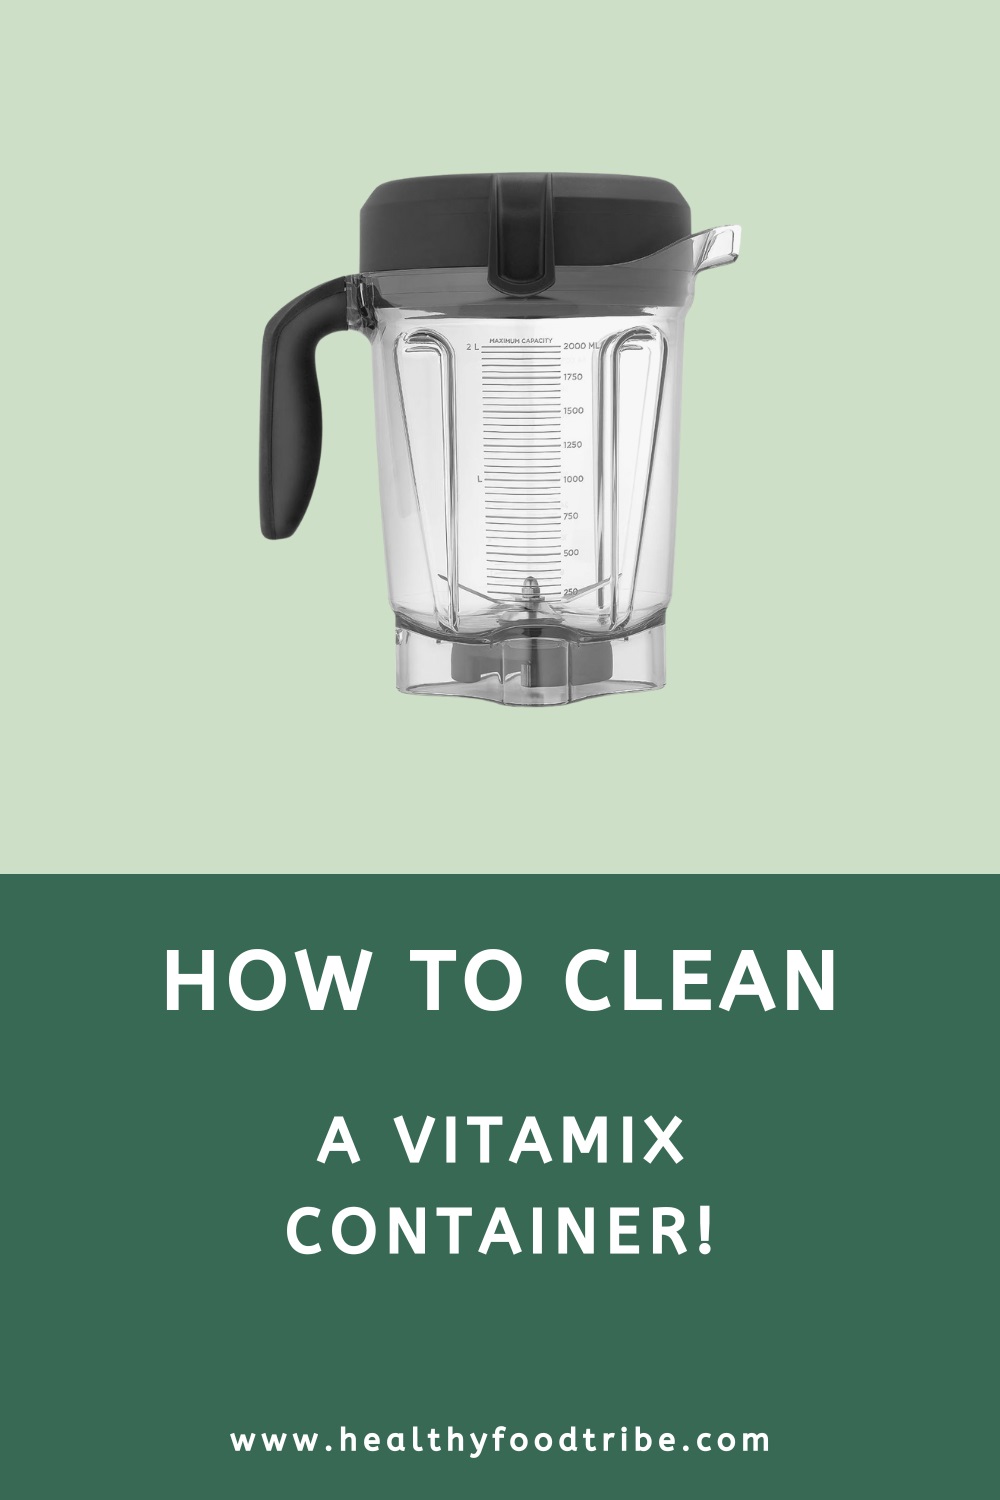 How to clean a Vitamix container (quick guide)